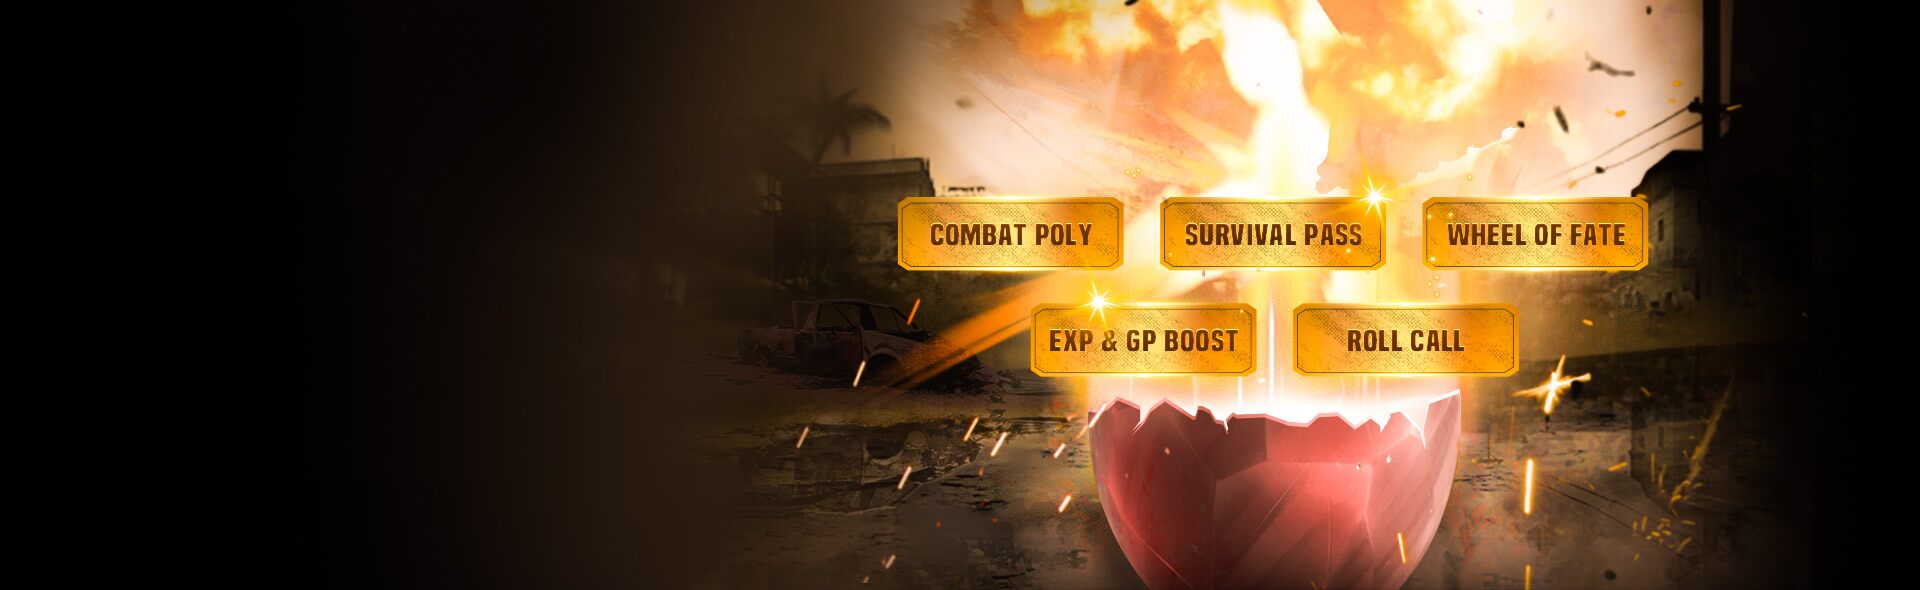 Ready to dominate this Easter? Gear up<br />and earn epic rewards with every victory.<br />Hop to it and let the games begin!